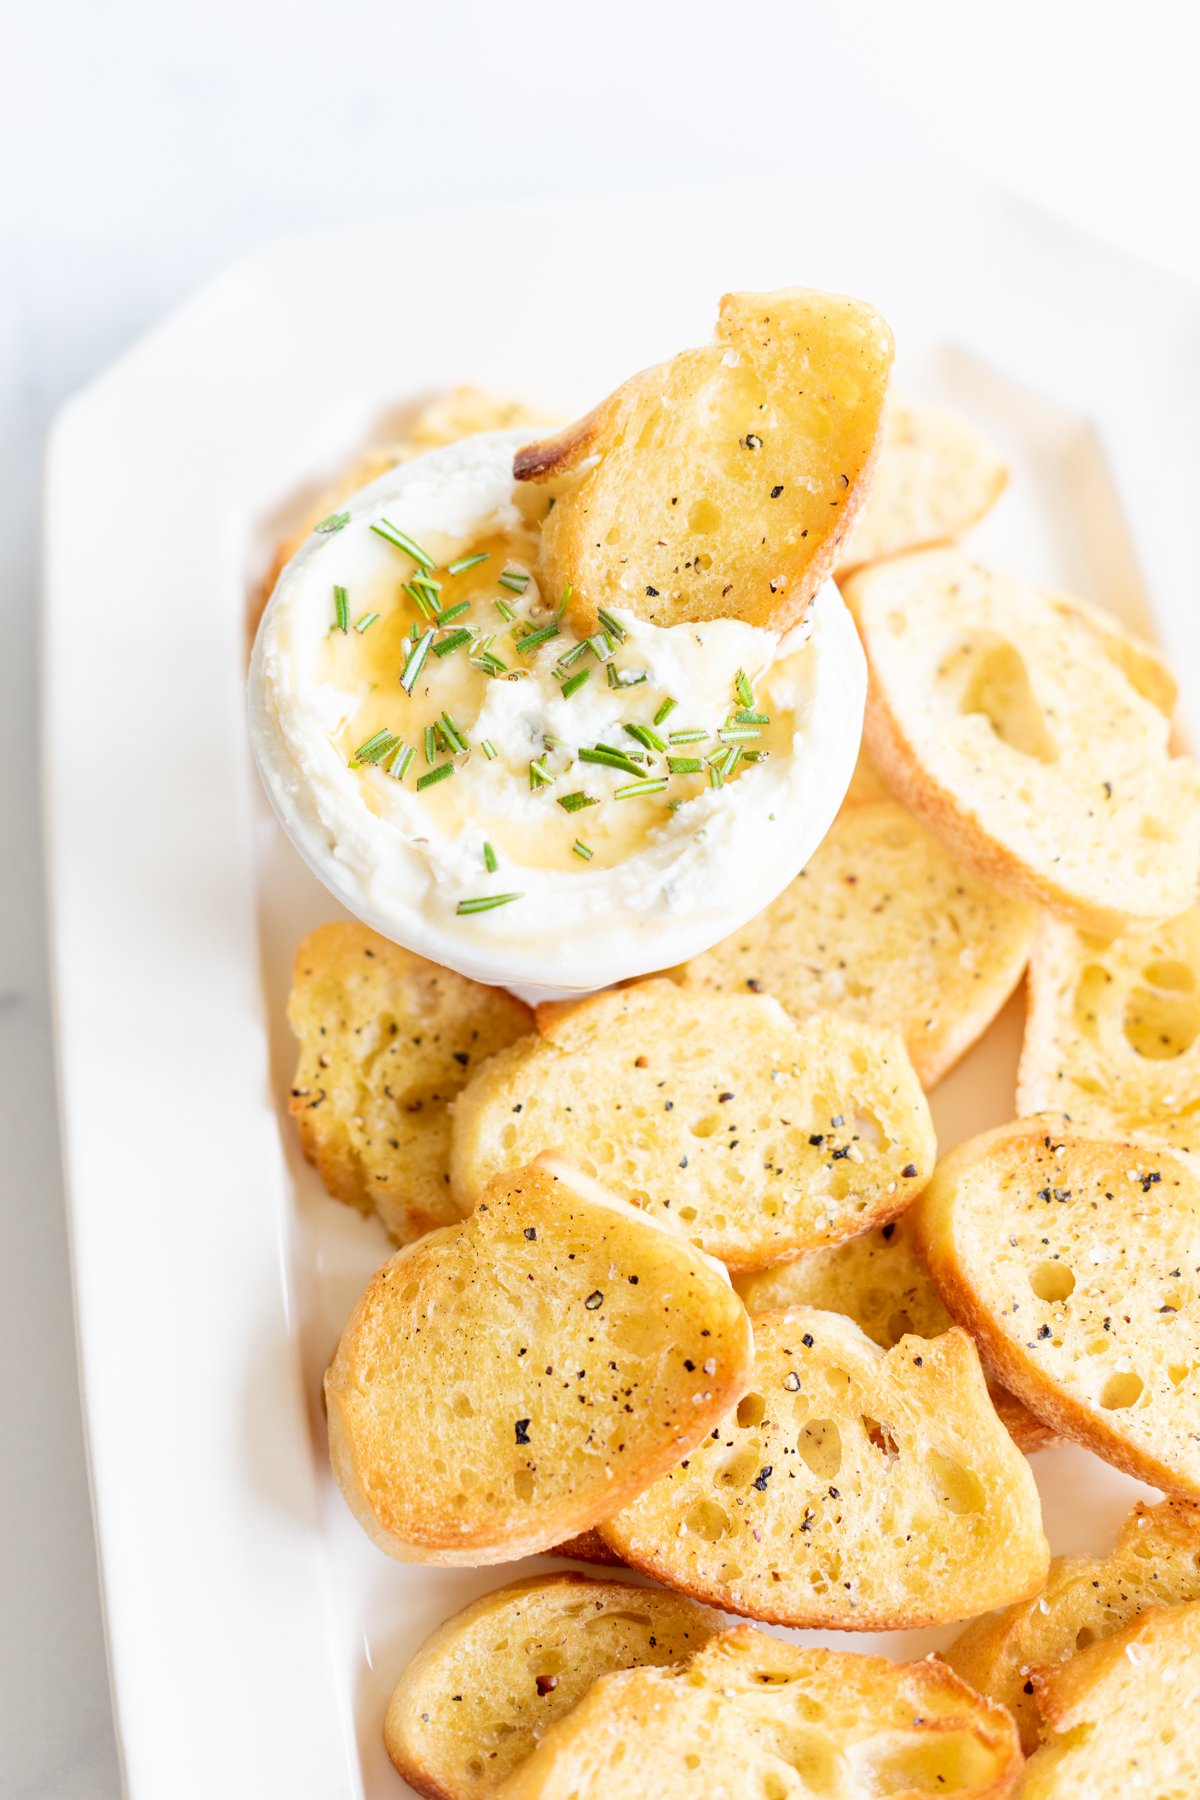 A plate of toasted crostini slices with a small bowl of creamy dip garnished with chopped herbs is displayed.